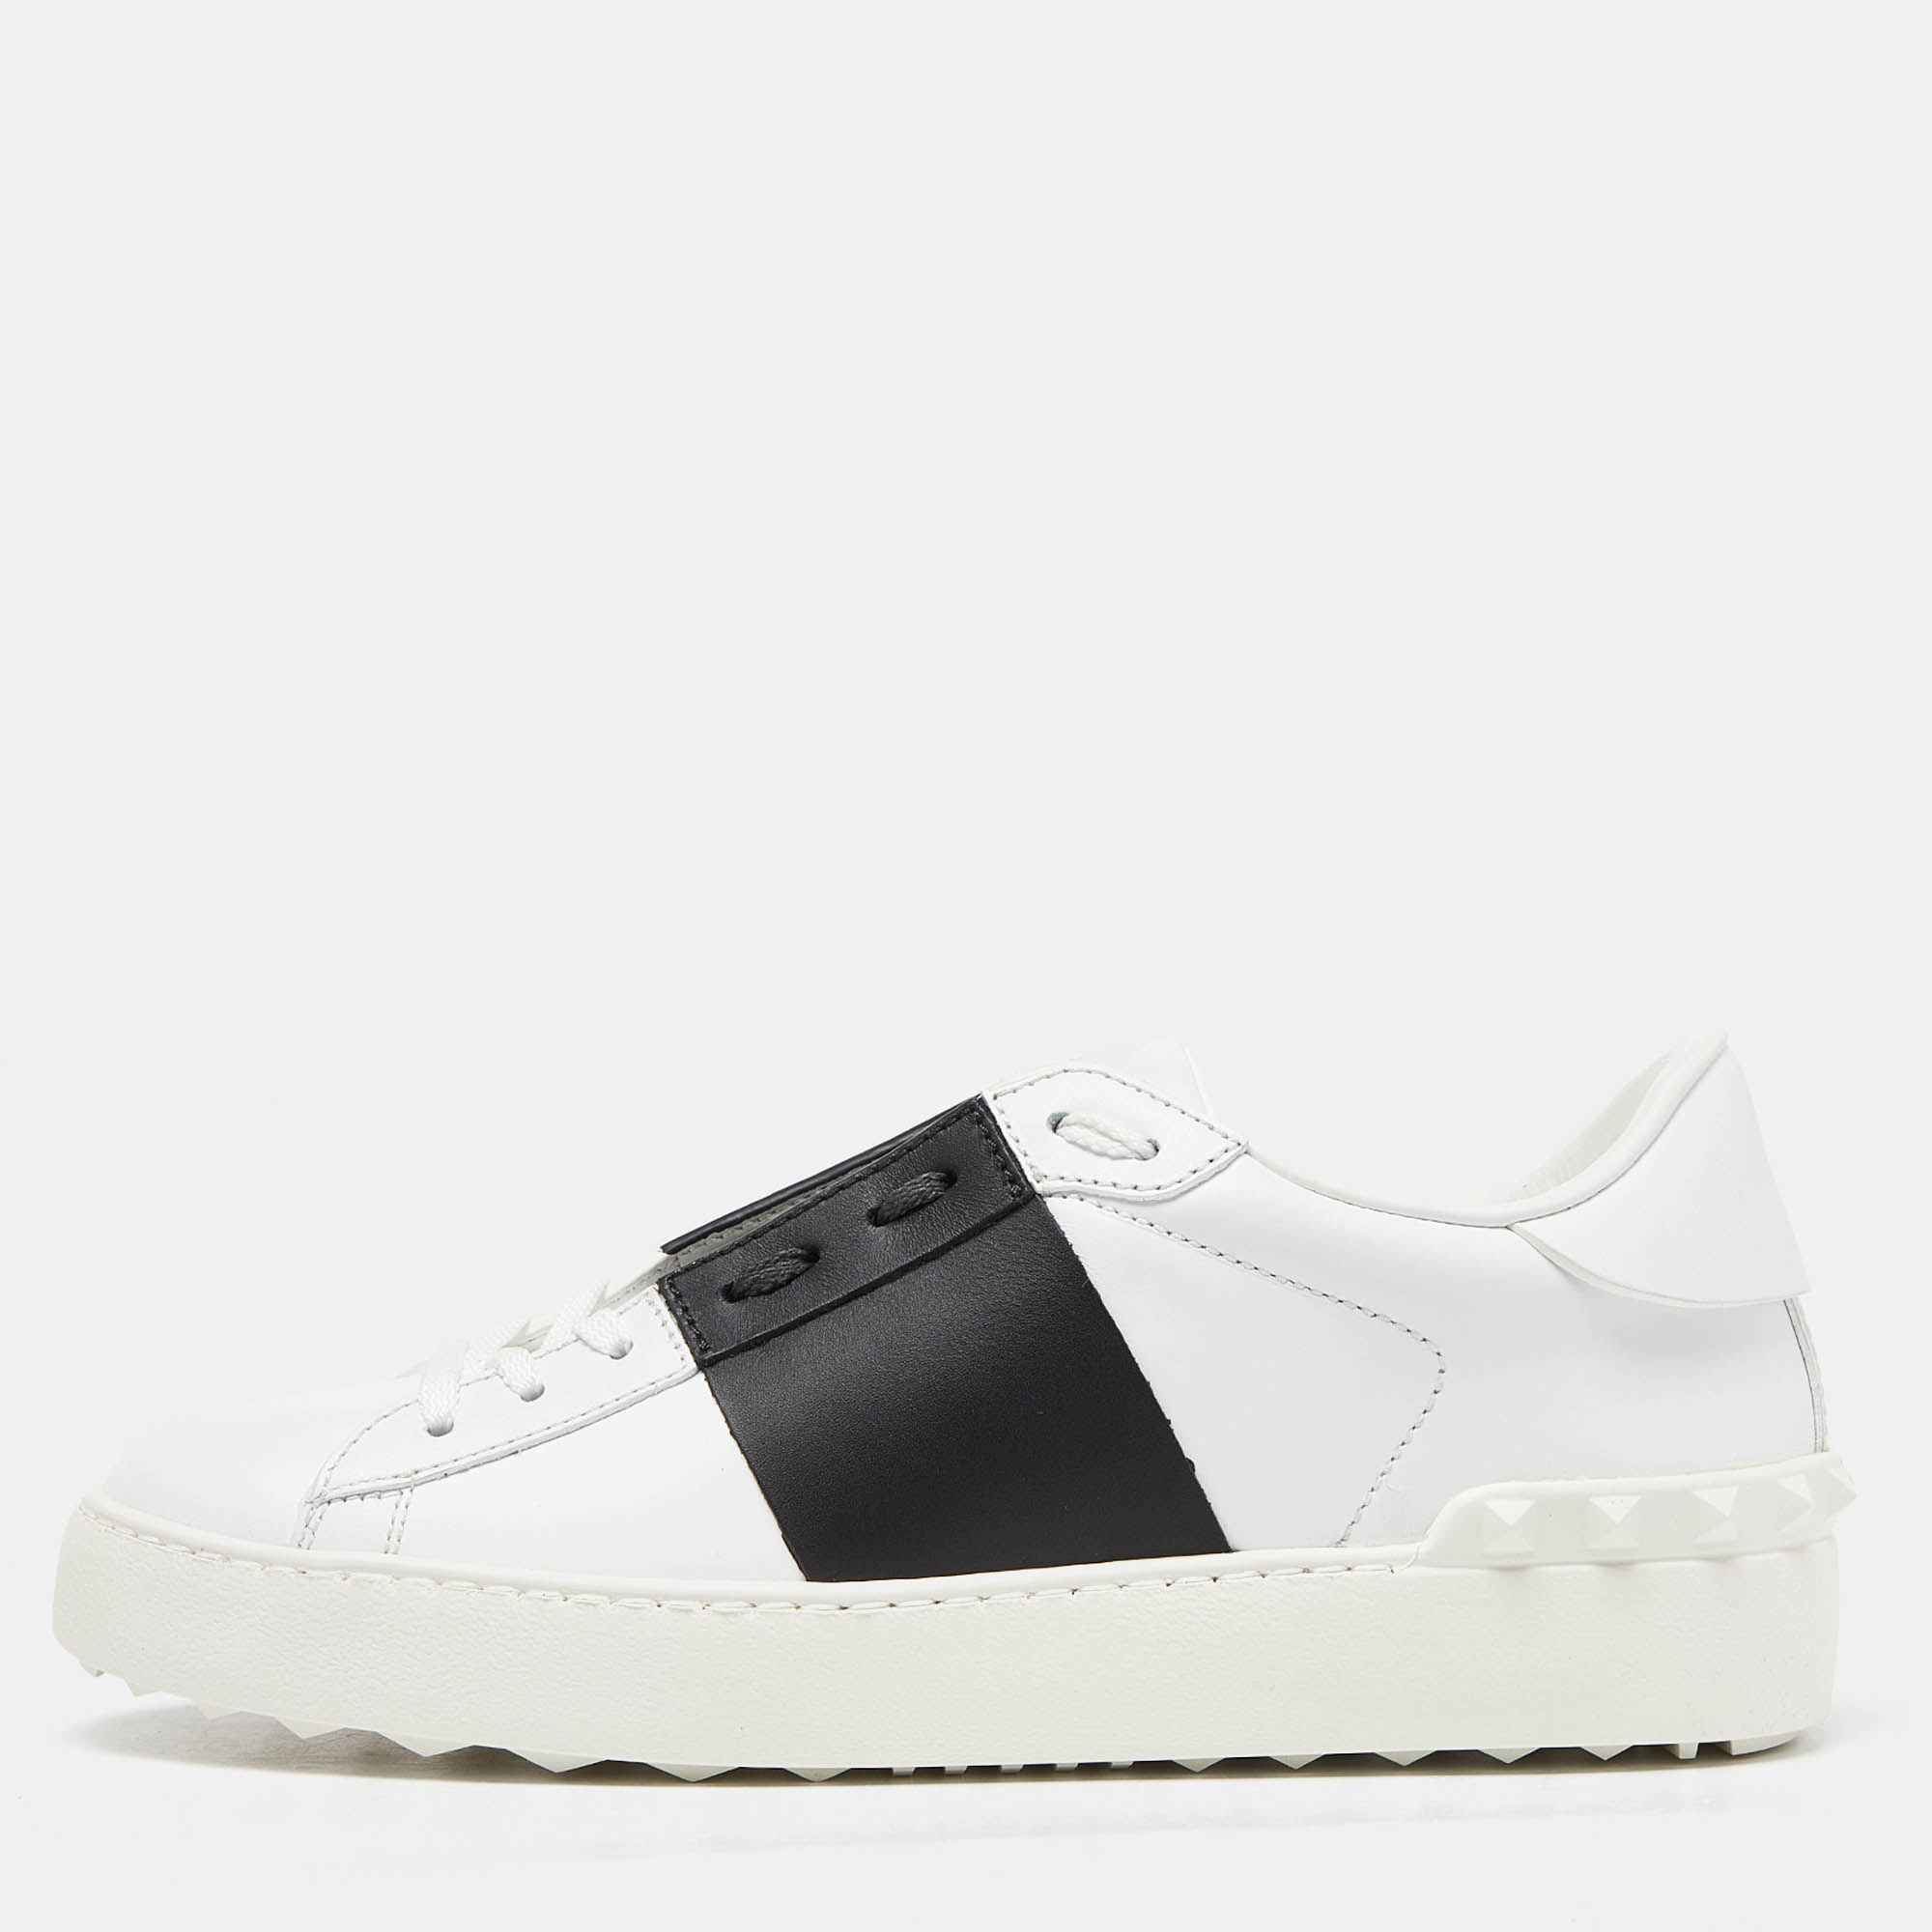 Valentino white/black leather open rockstud low top sneakers size 37.5